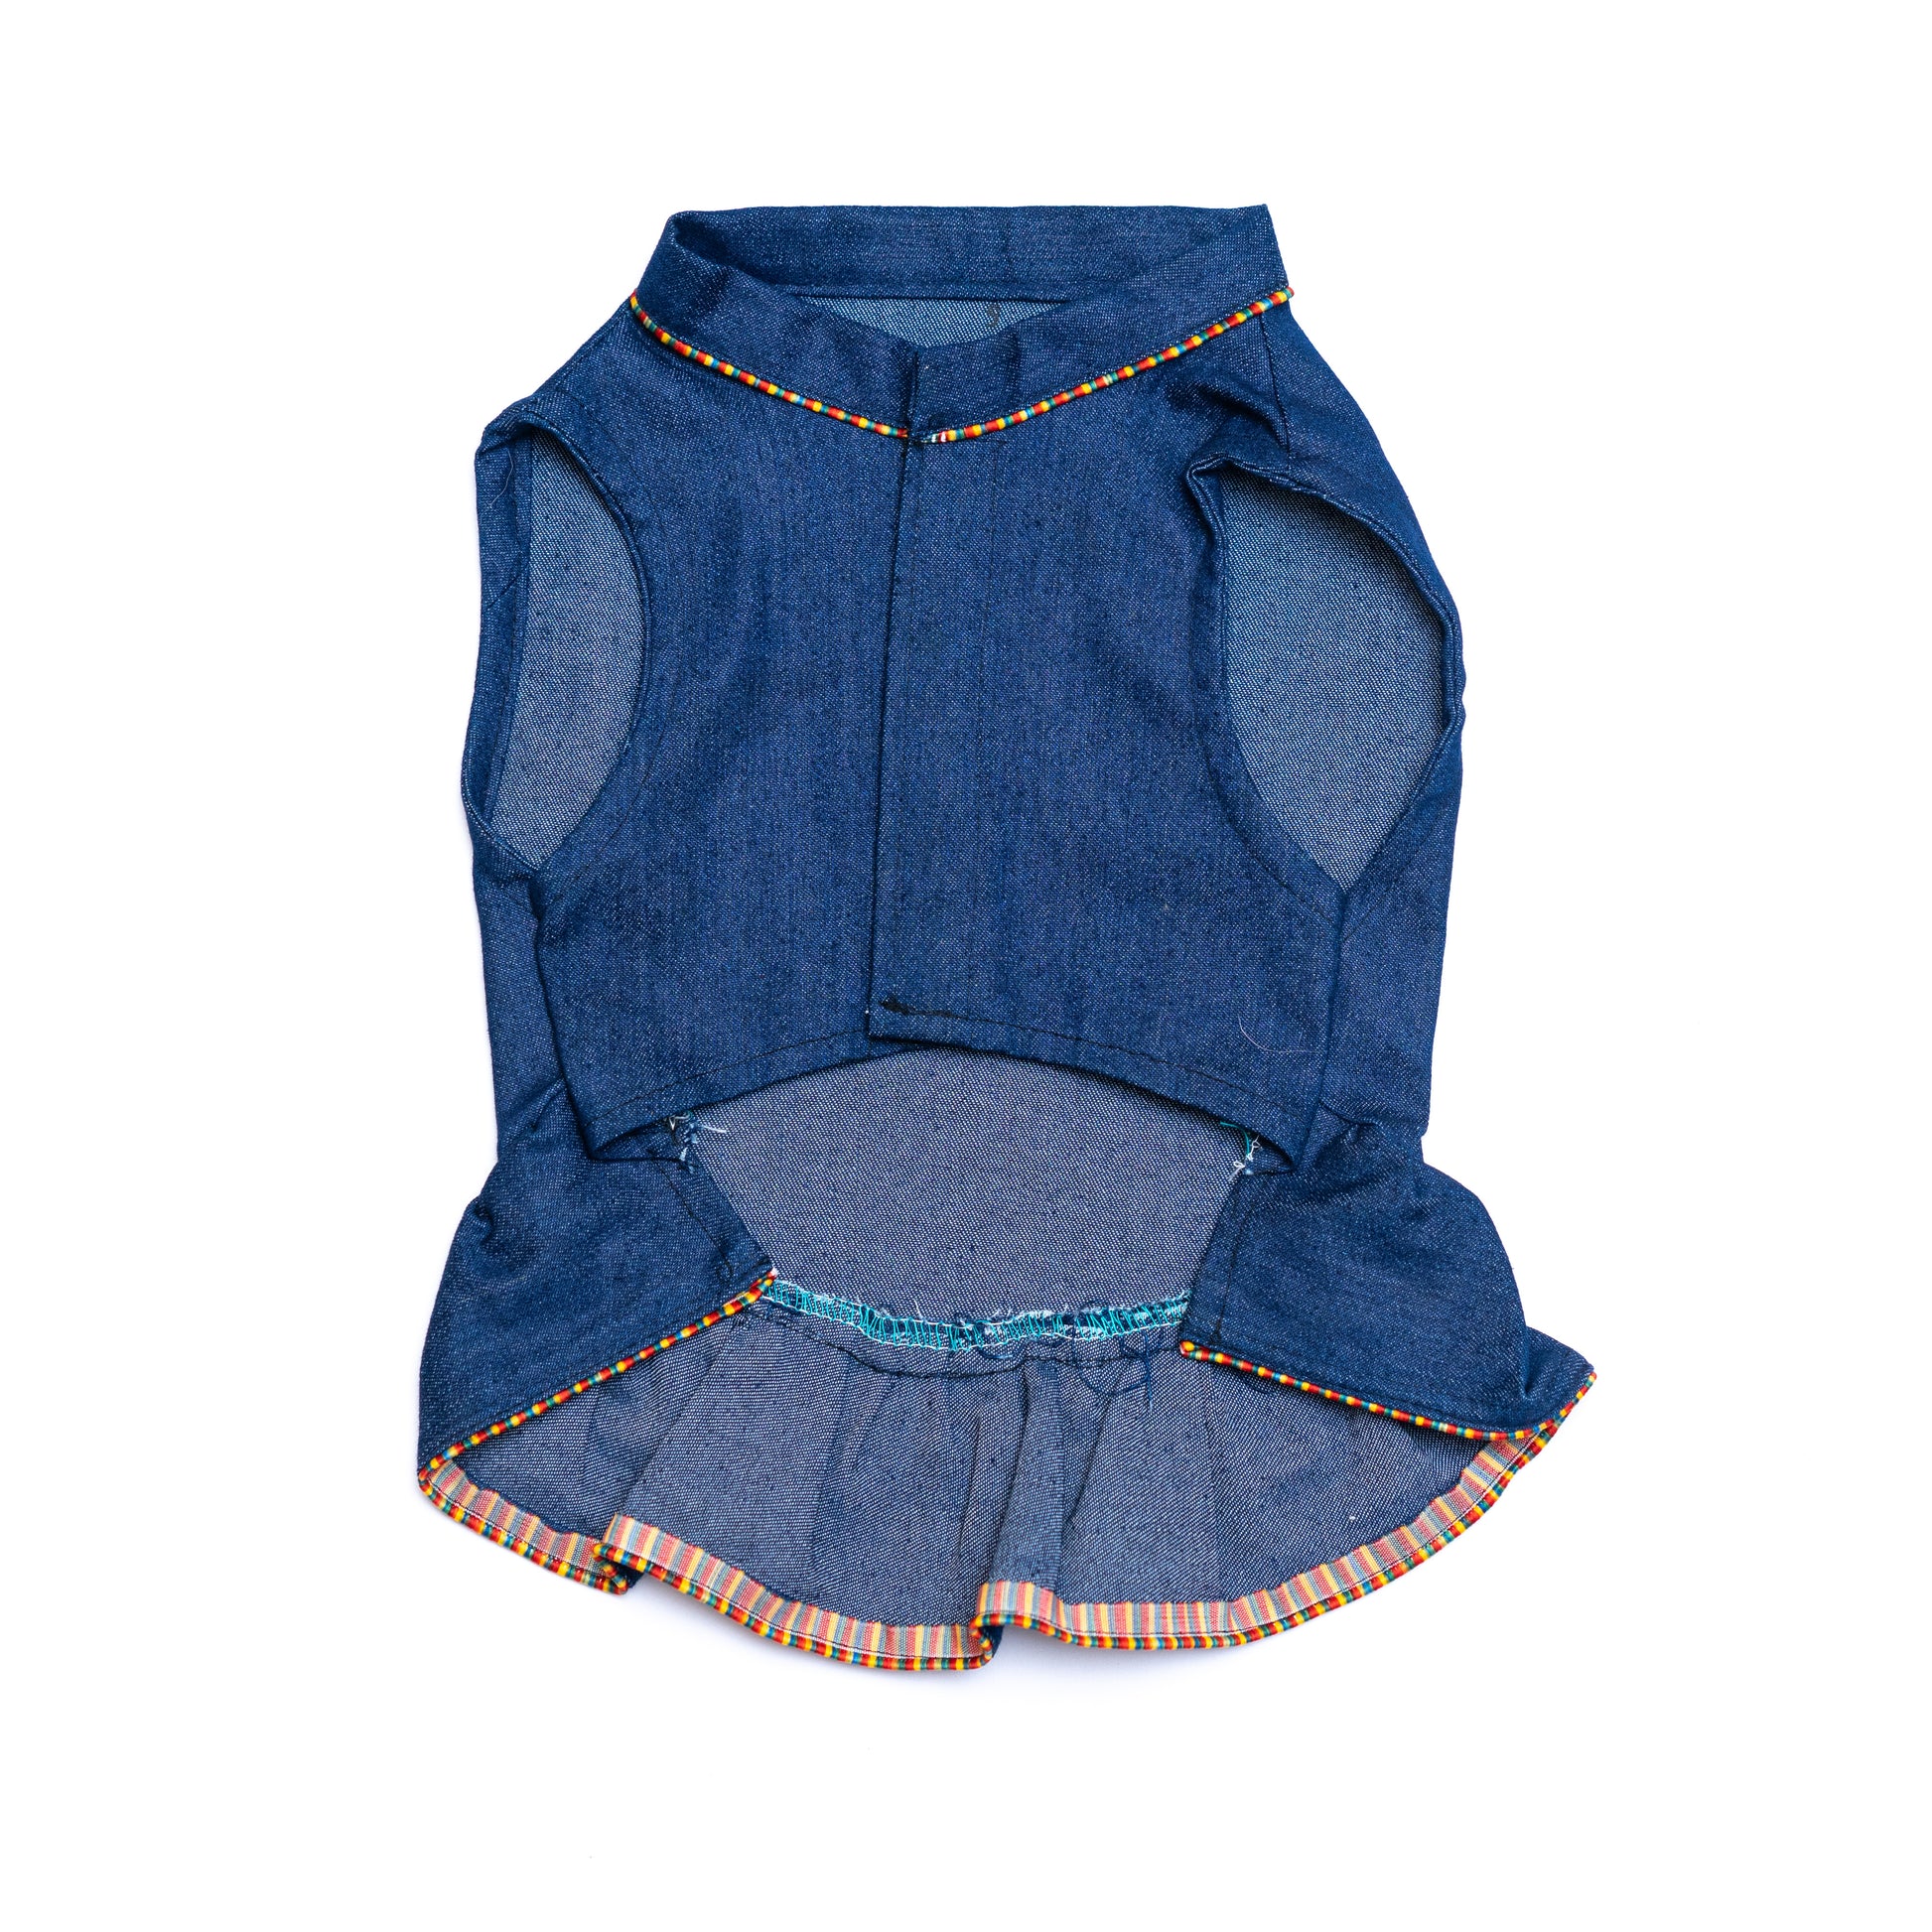 Pawgy Pets Denim Ruffle Dress for Dogs